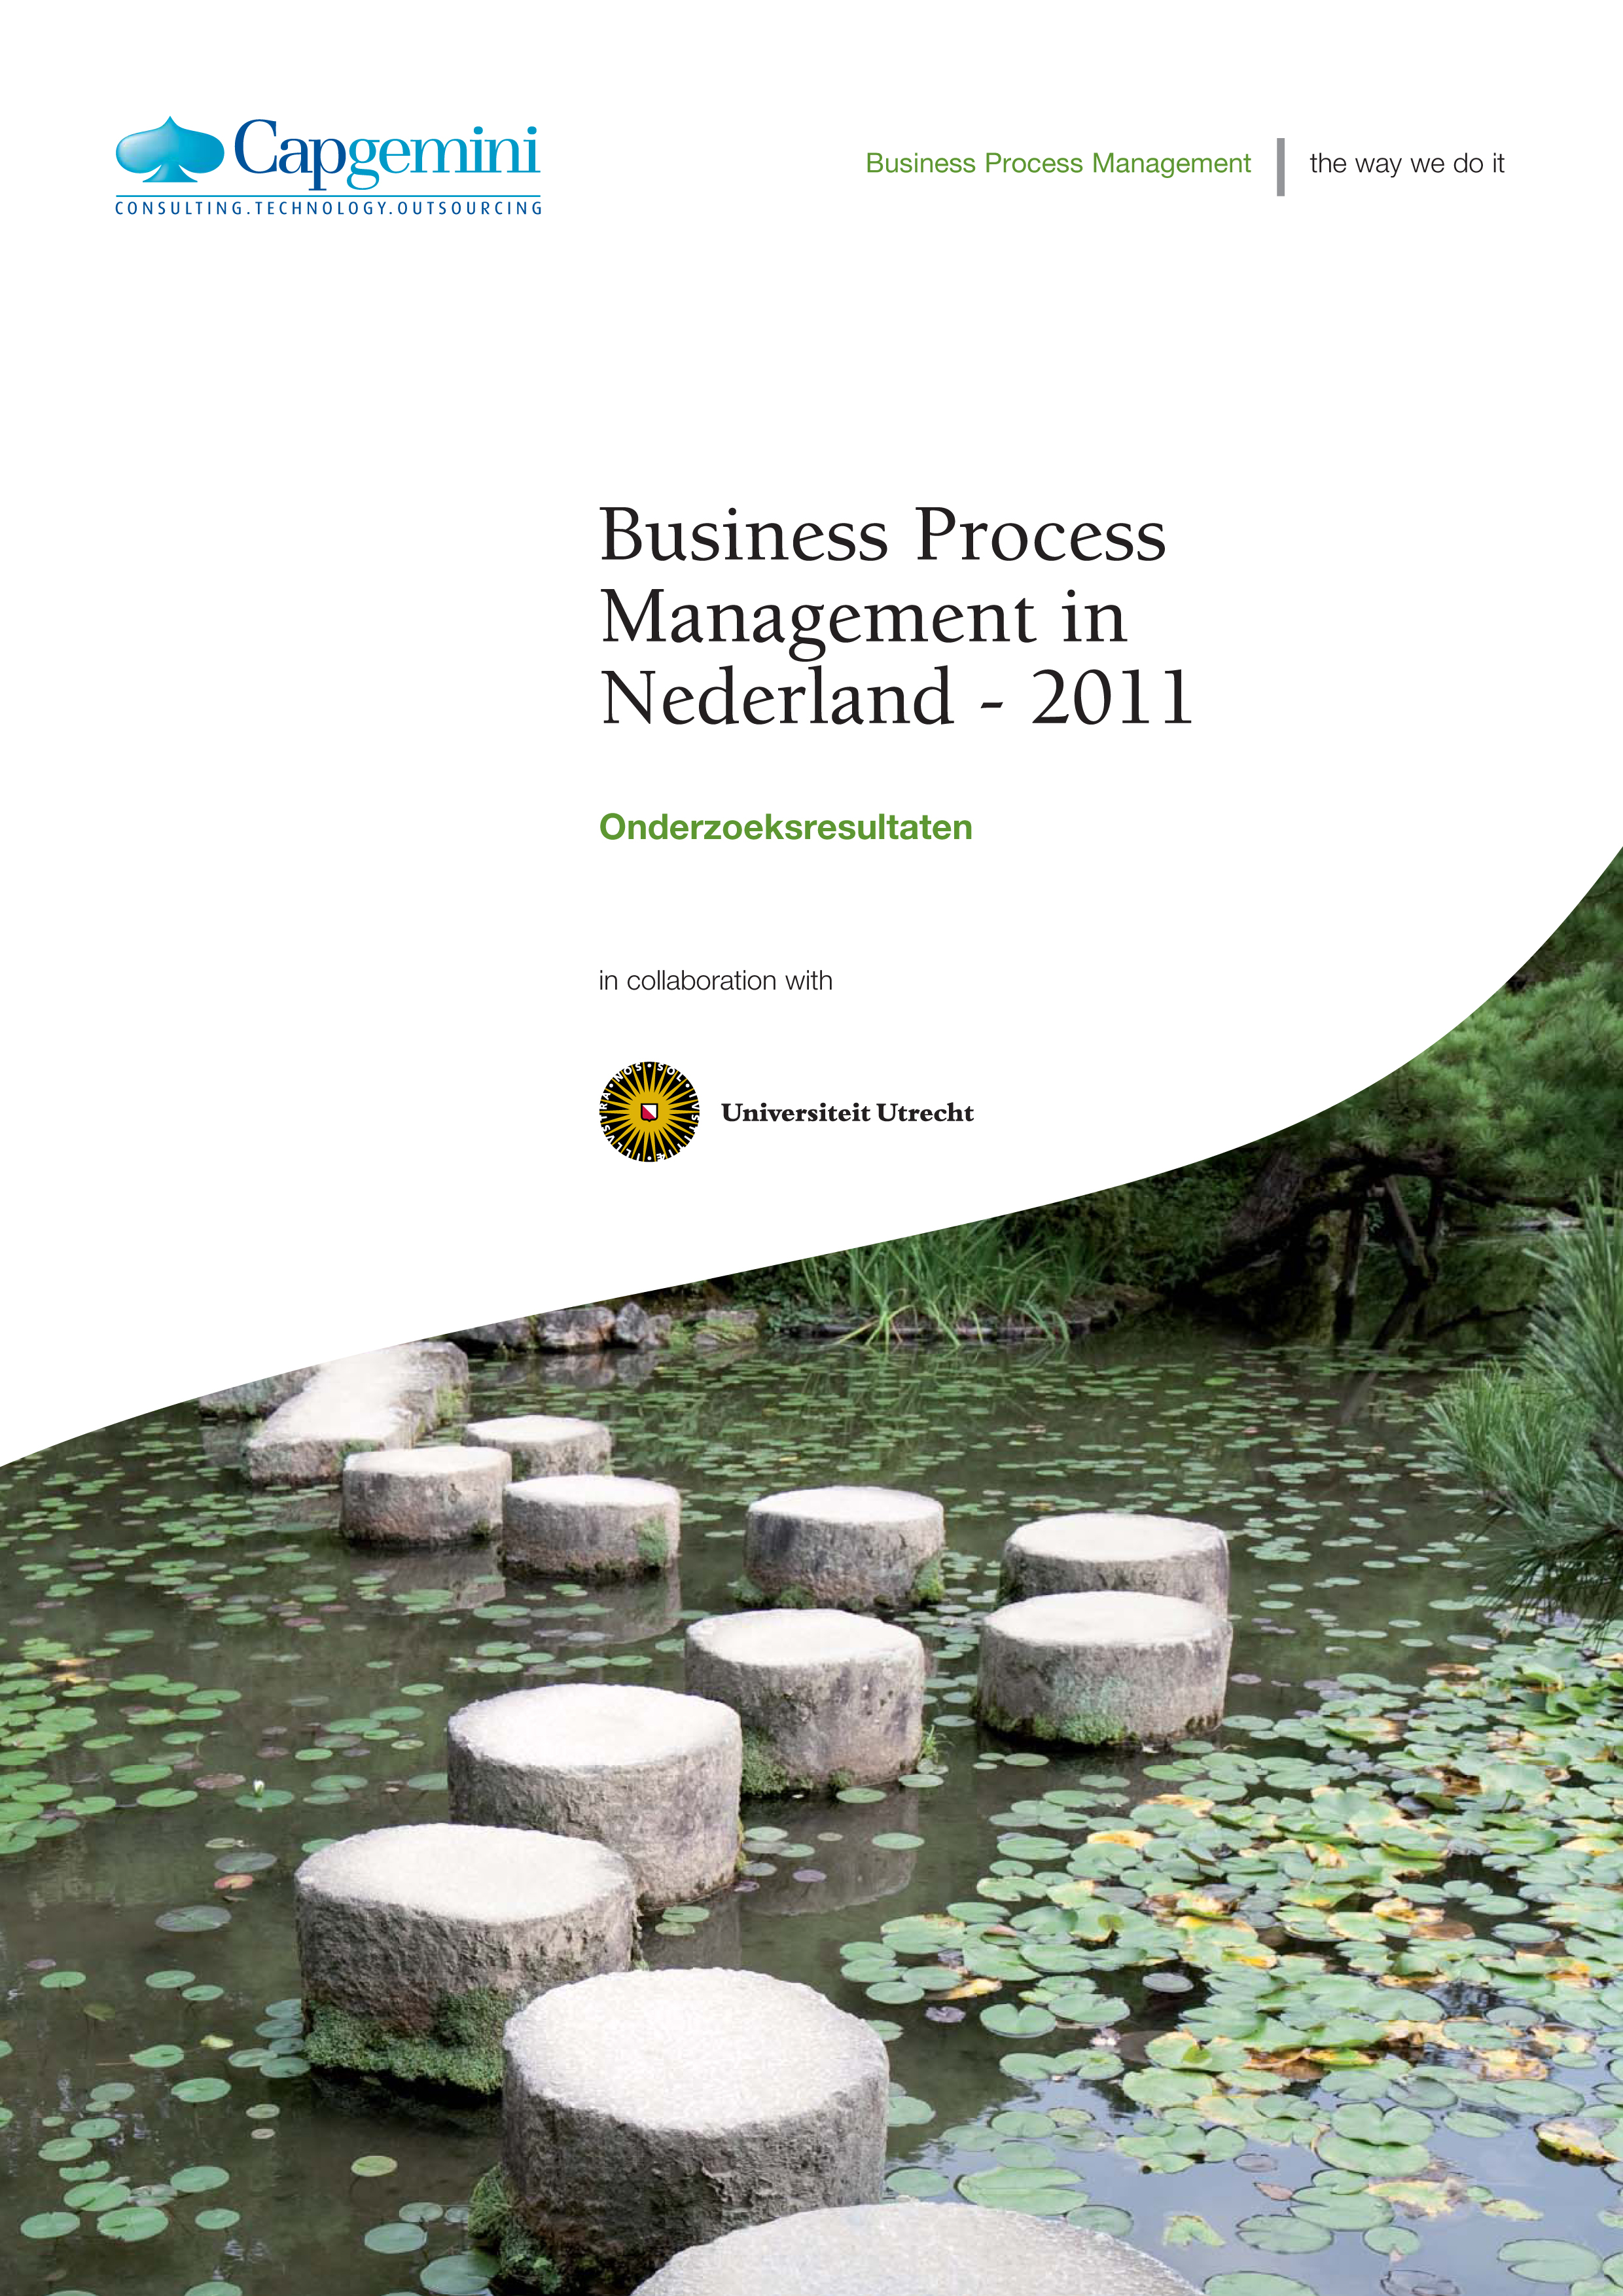 BPM-Report-2011-Cover-High-Res.jpg